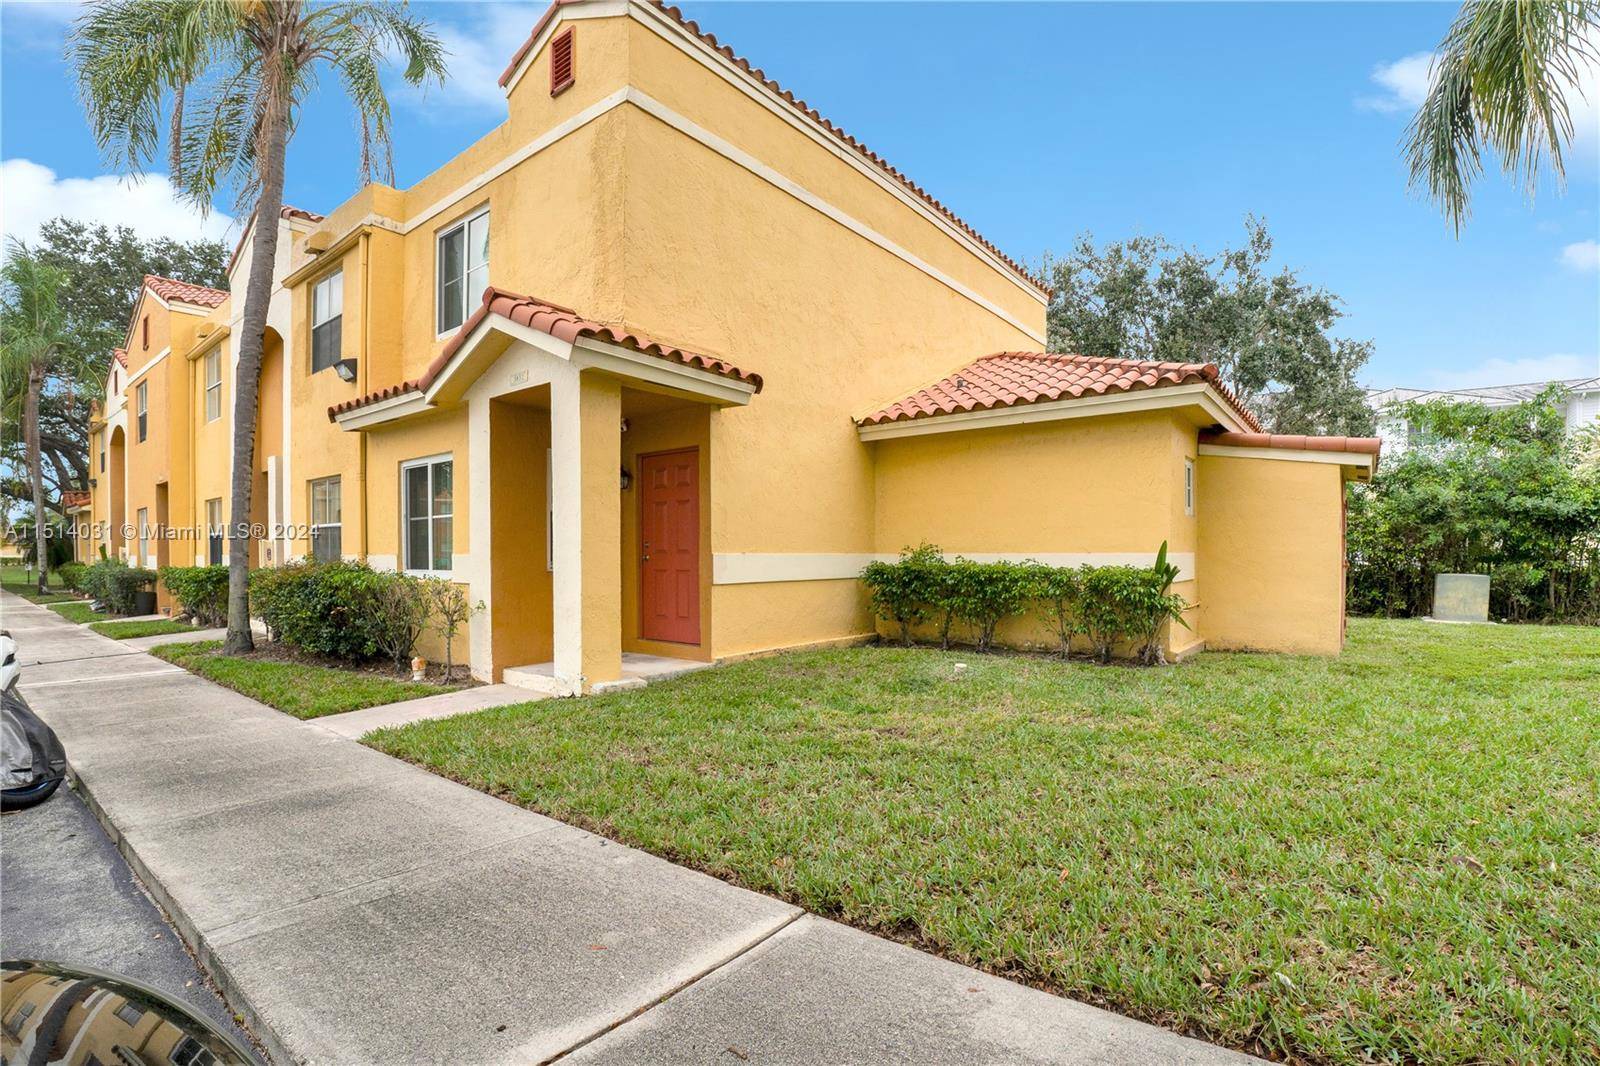 If you are looking for a comfortable 3 2 under 400, 000 in a great location and just across of street from a park this townhouse in perfect for you ...